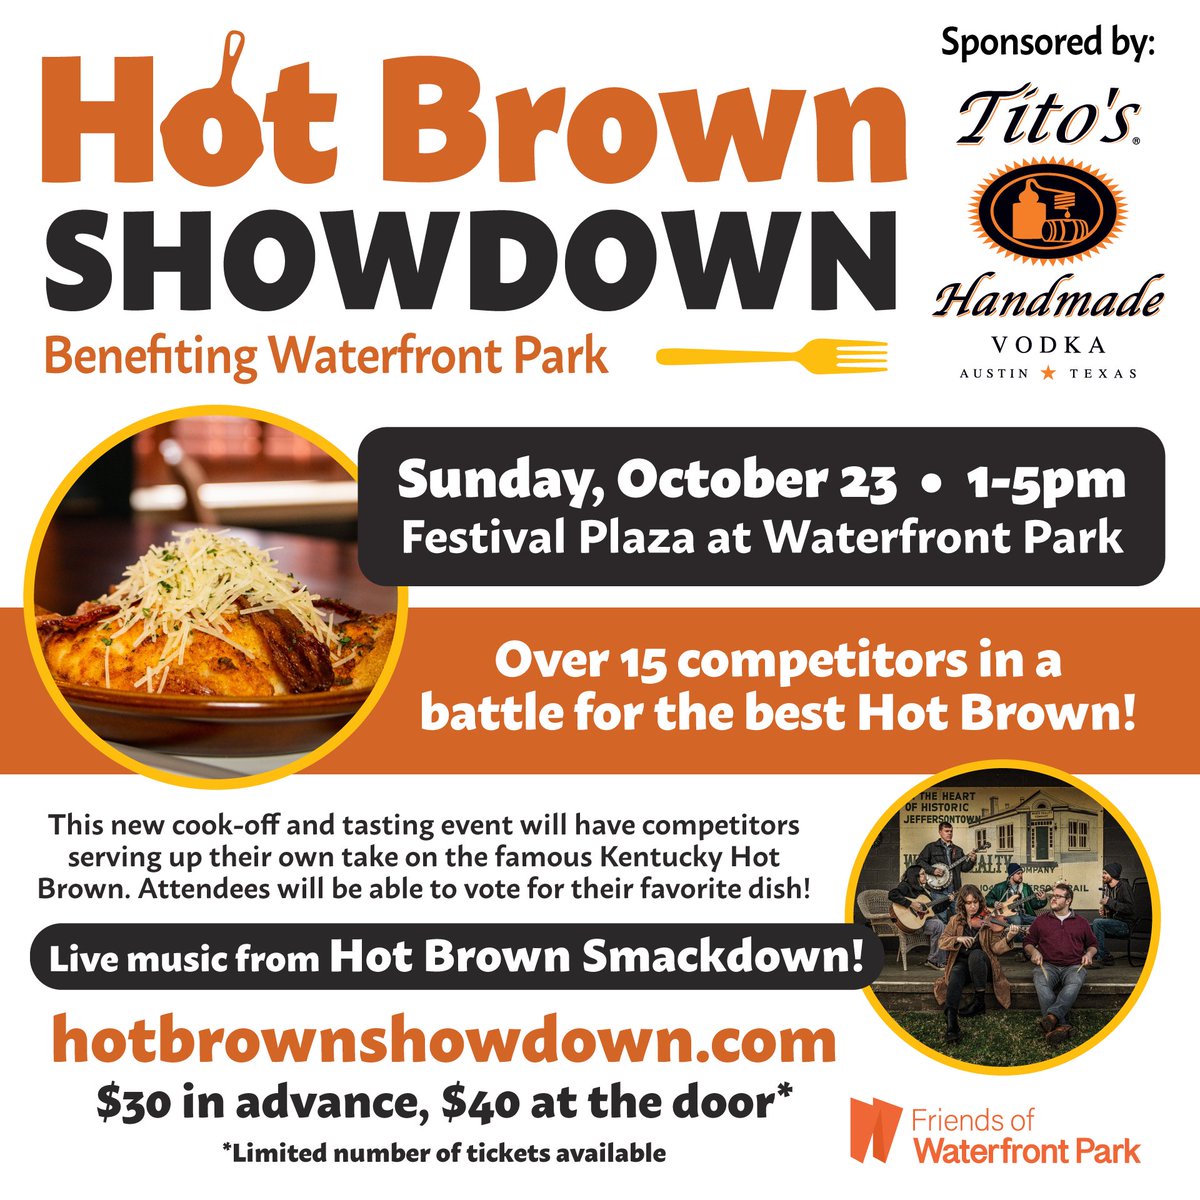 Get down with the Hot Brown this Sunday at @WFPark during the inaugural Hot Brown Showdown! Sample varieties of Louisville's most iconic dish while 15 local restaurants and caterers compete for the title of Best Hot Brown in Town. 😋 🎟️: hotbrownshowdown.com